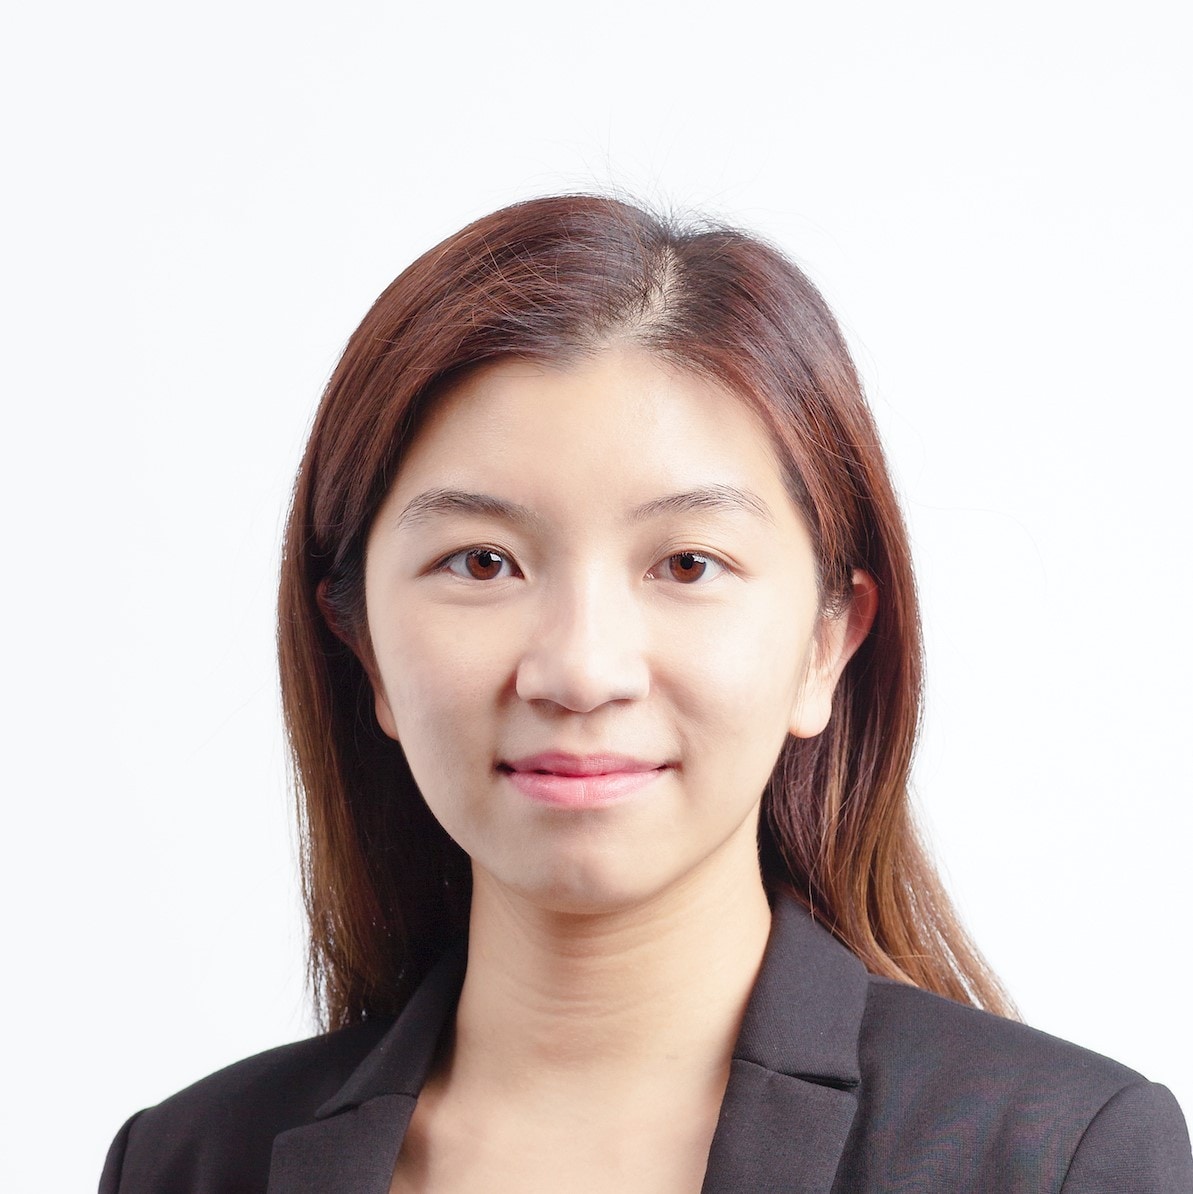 Asian woman with brown hair wearing a black blazer smiling to the camera